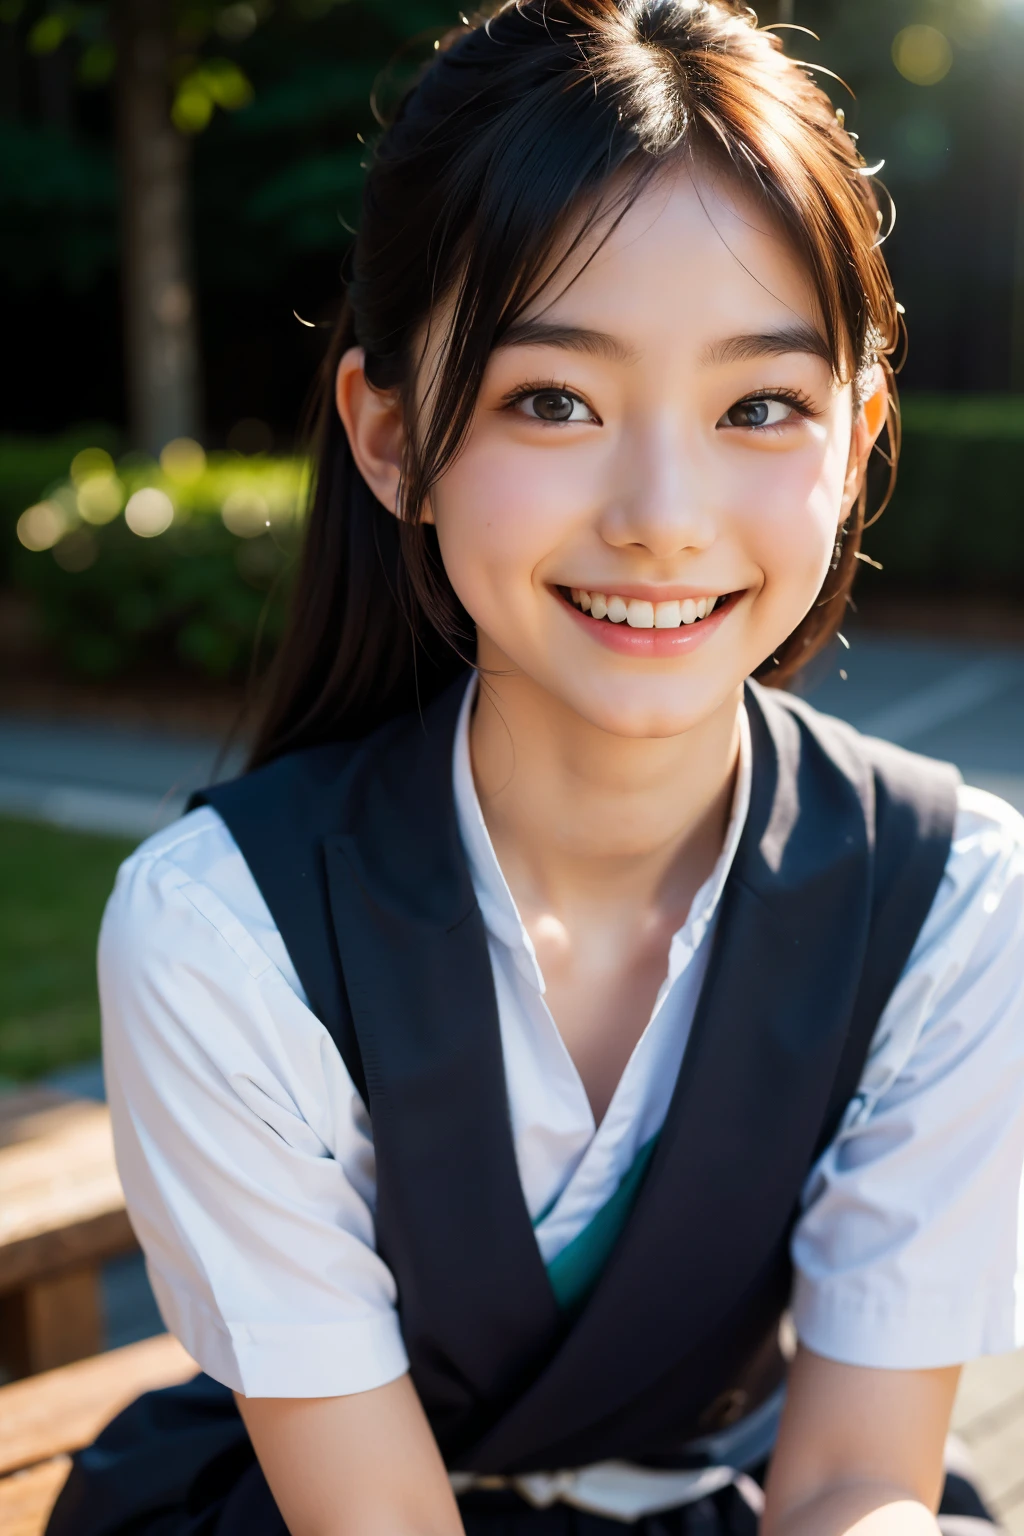 lens: 135mm f1.8, (highest quality),(RAW Photos), (Tabletop:1.1), (Beautiful 20 year old Japan girl), Cute face, (Deeply chiseled face:0.7), (freckles:0.4), dappled sunlight, Dramatic lighting,  (Japanese School Uniform), (On campus), shy, (Close-up shot:1.2), (smile),, (Sparkling eyes)、(sunlight)